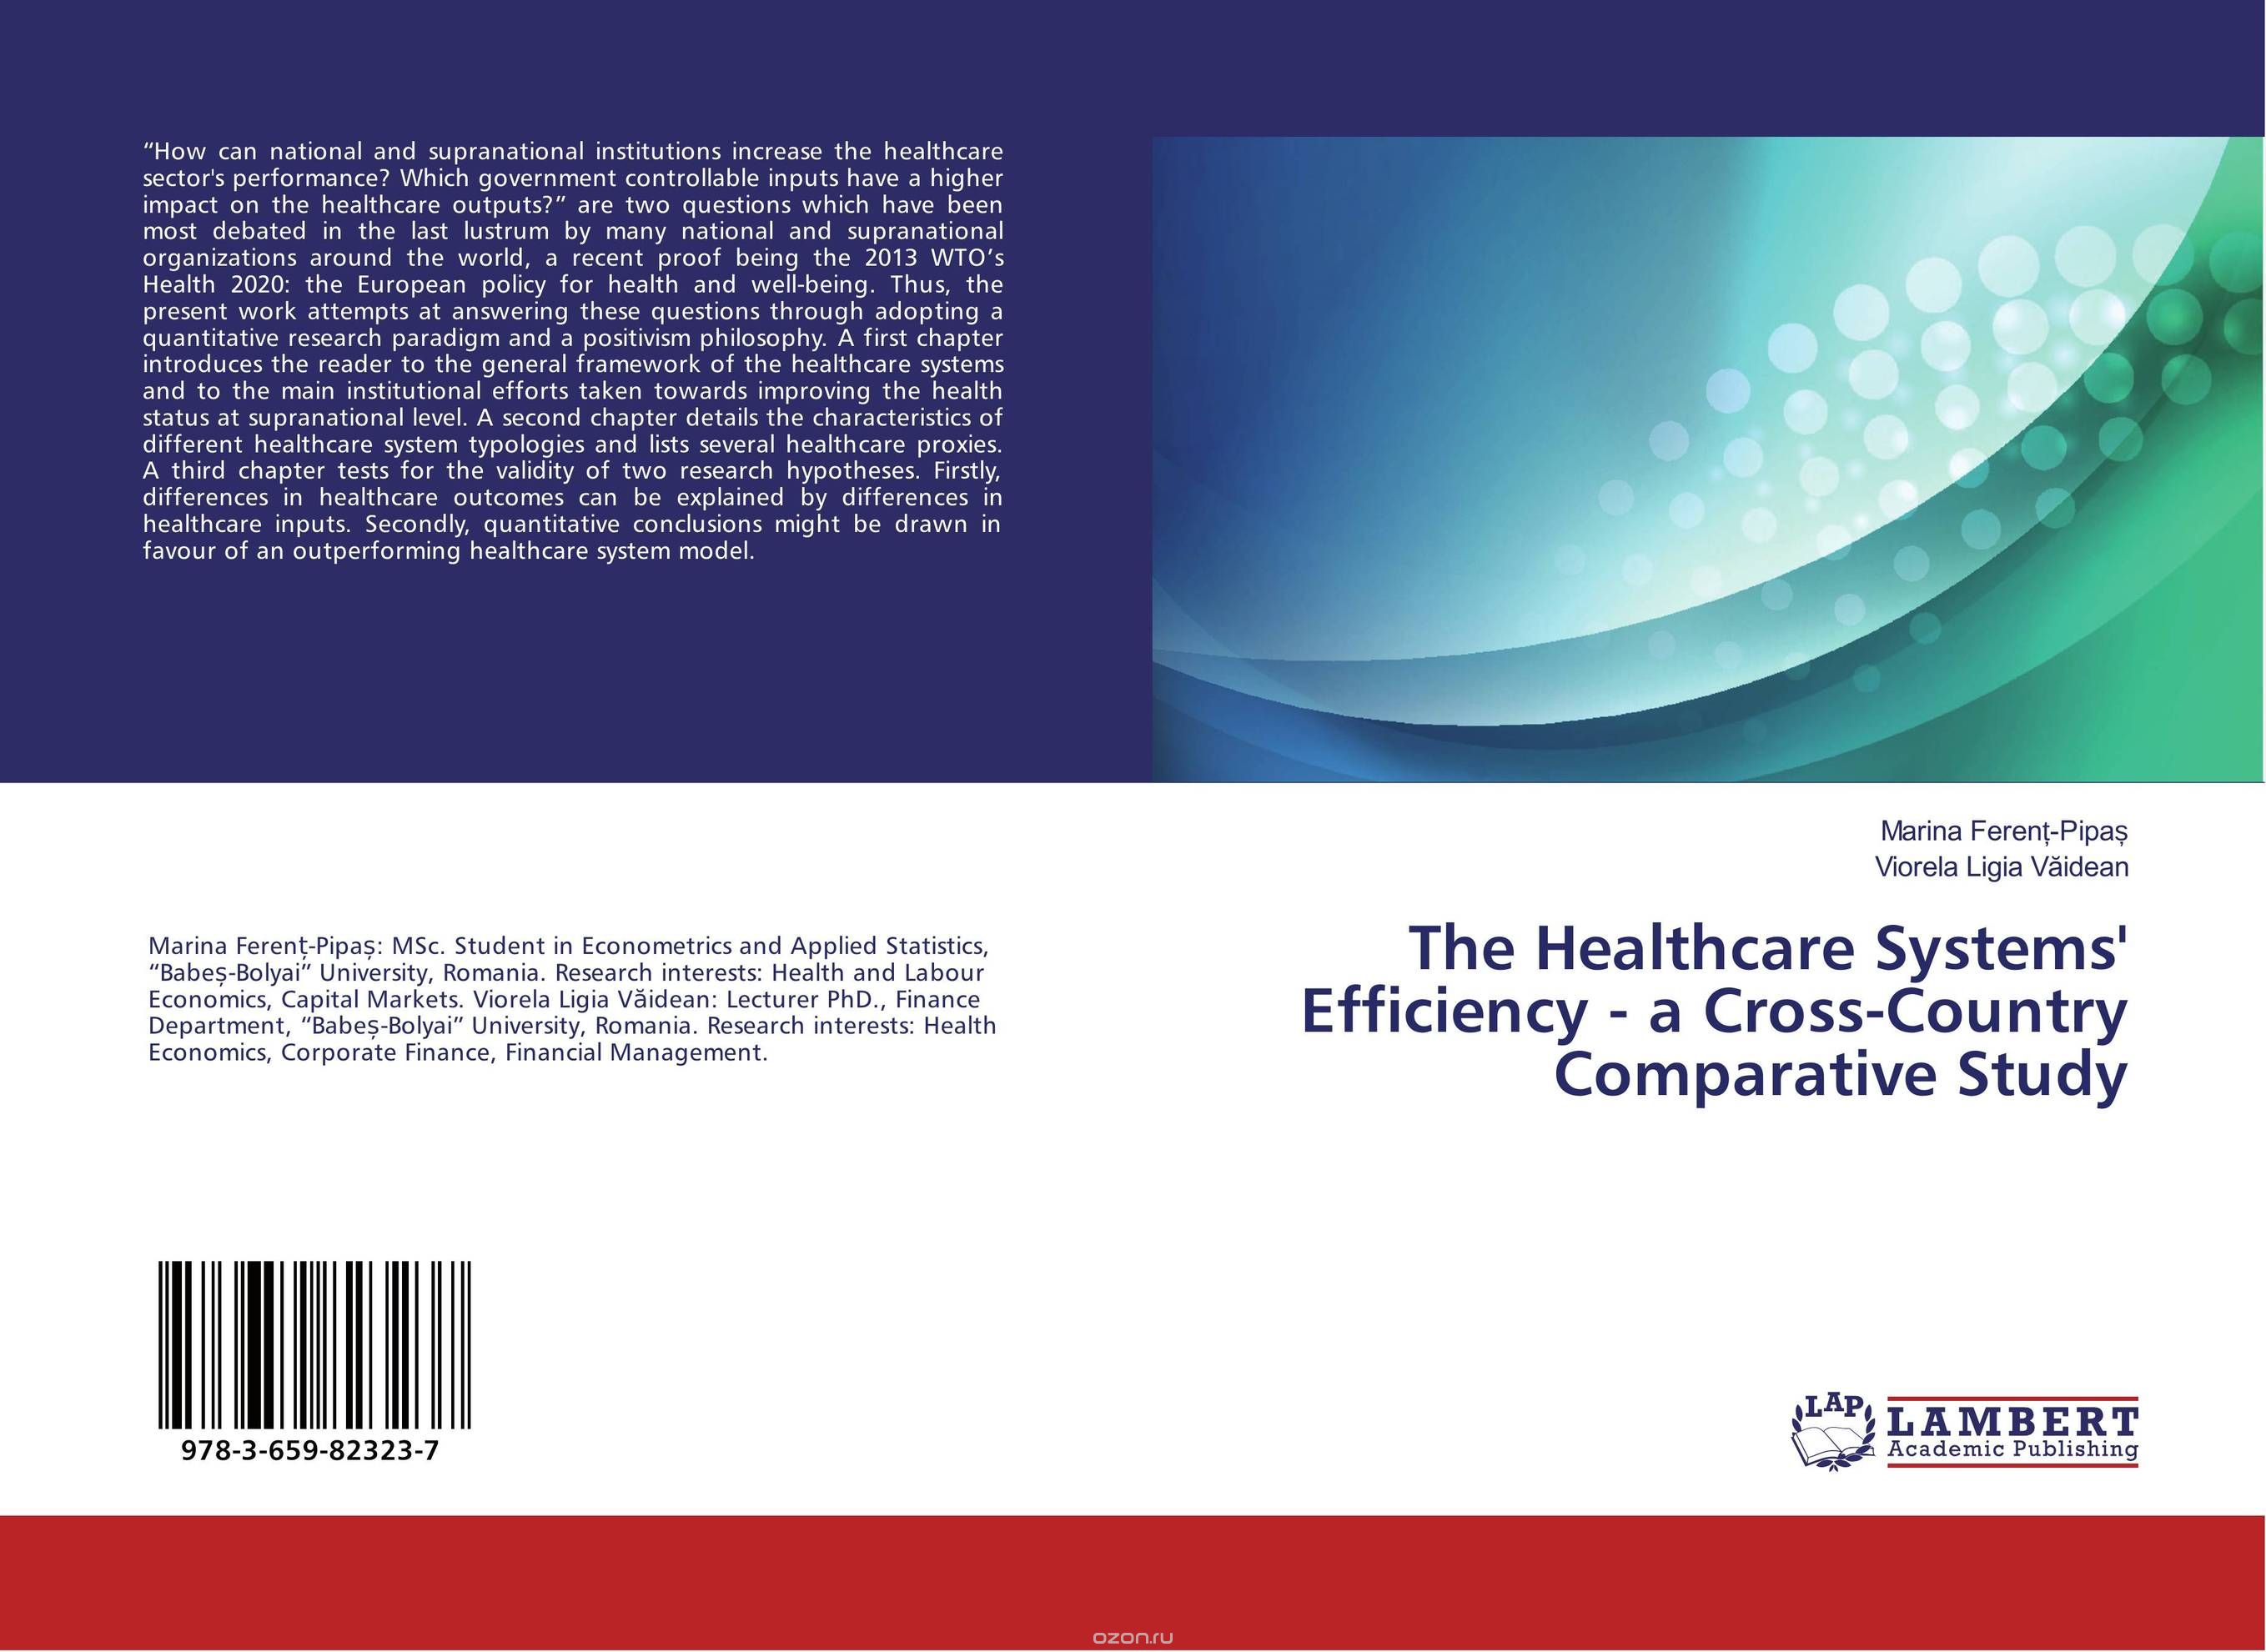 Скачать книгу "The Healthcare Systems' Efficiency - a Cross-Country Comparative Study"